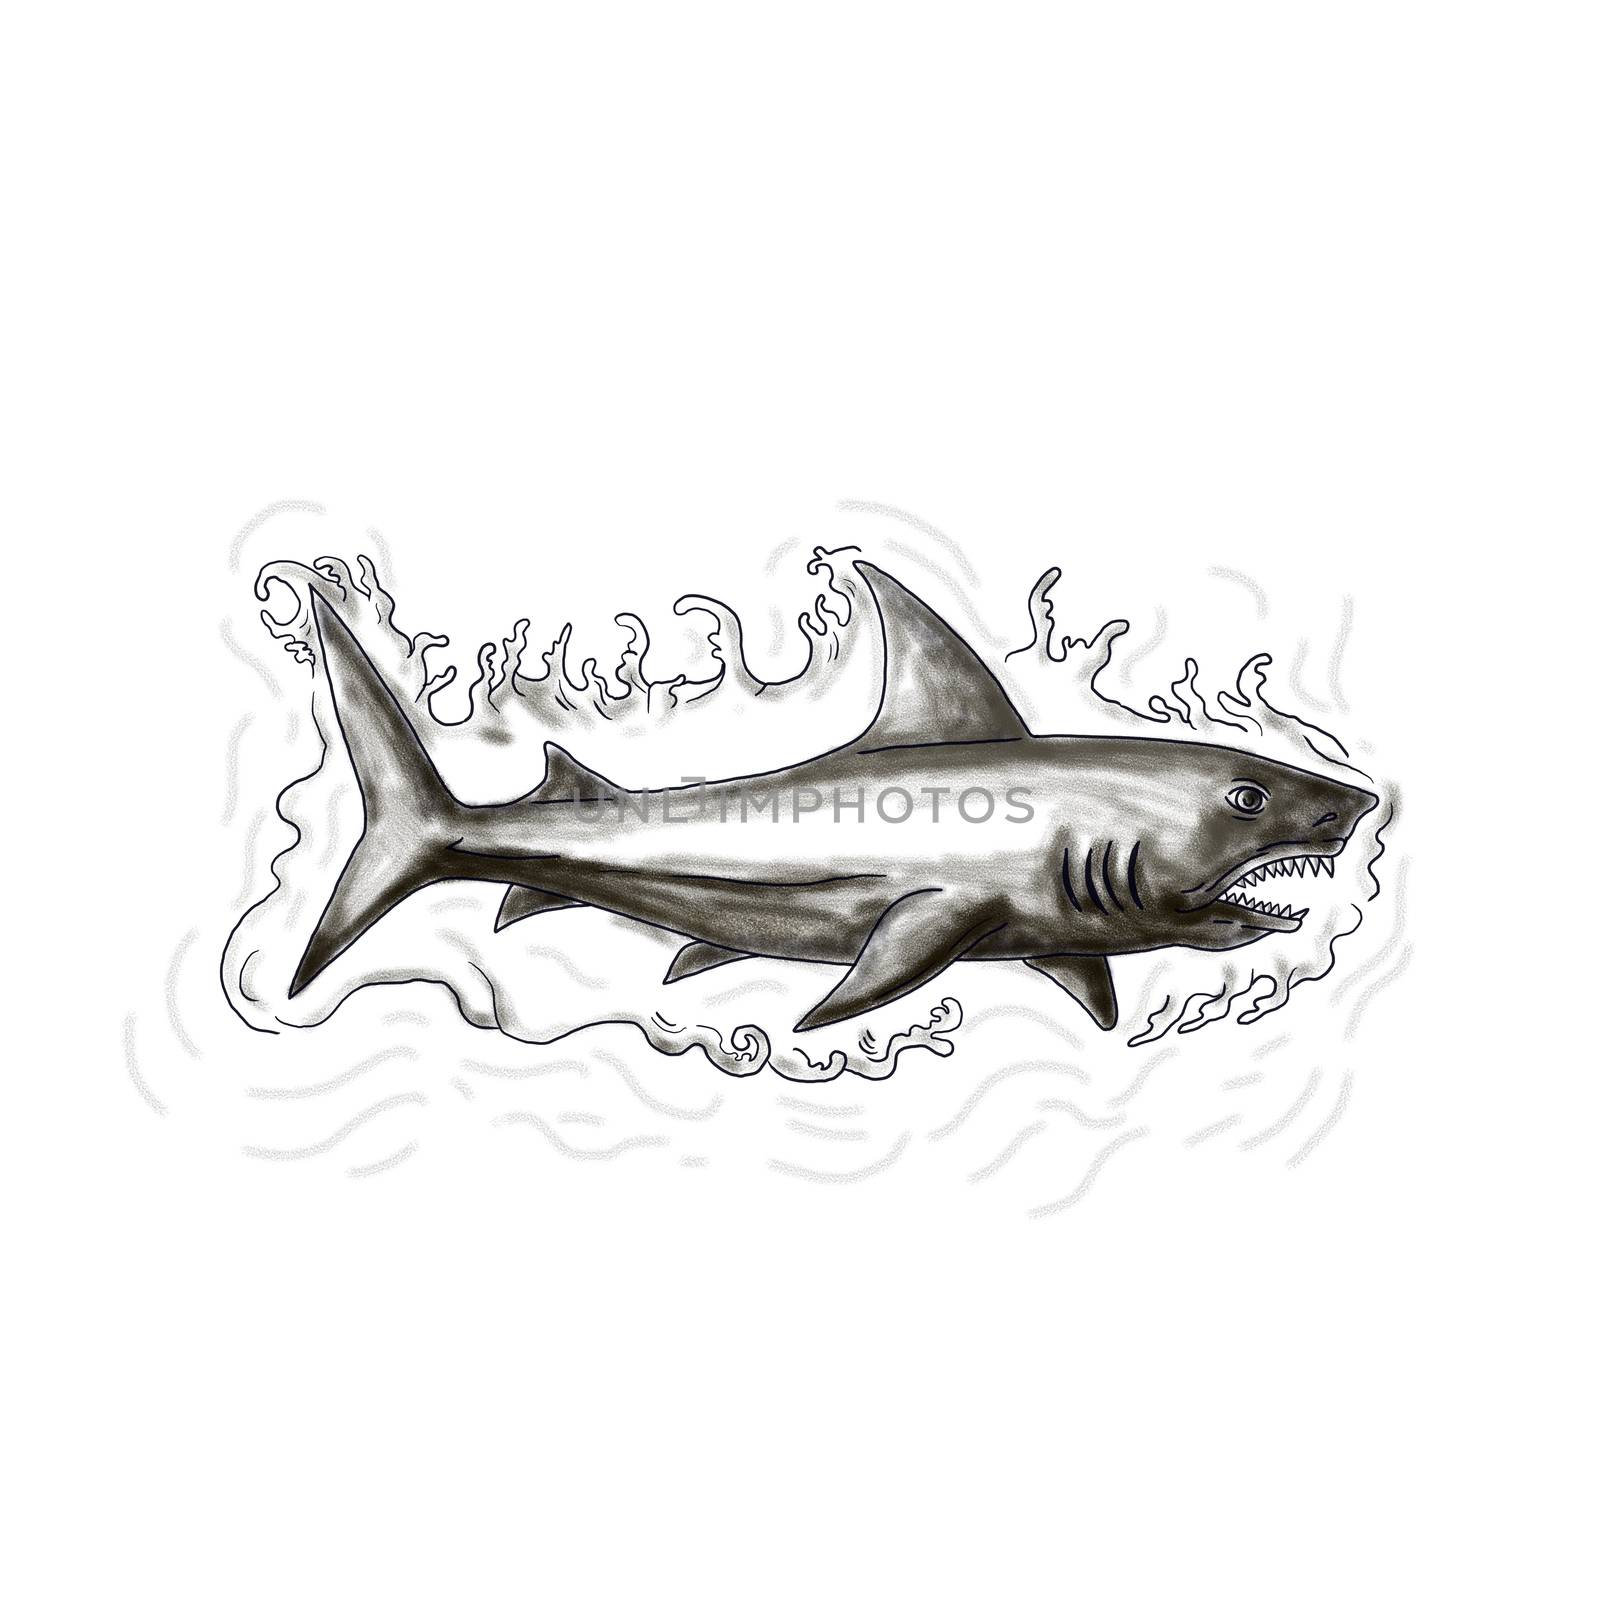 Tattoo style illustration of a shark swimming in water viewed from the side set on isolated white background.